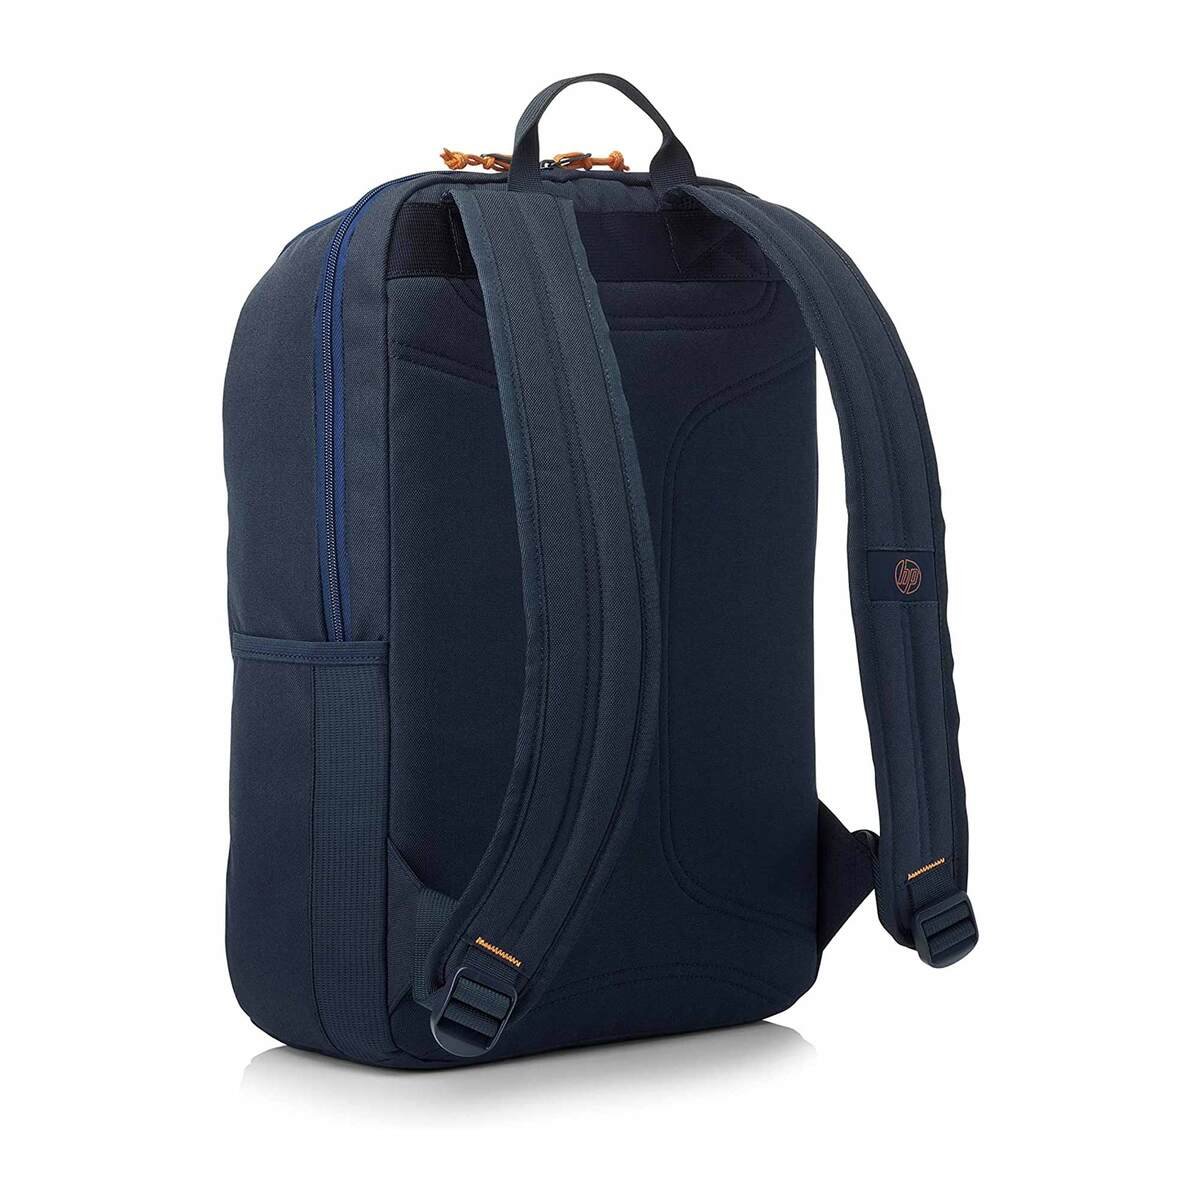 HP Commuter Backpack 5EE92AA 15.6" Assorted Color